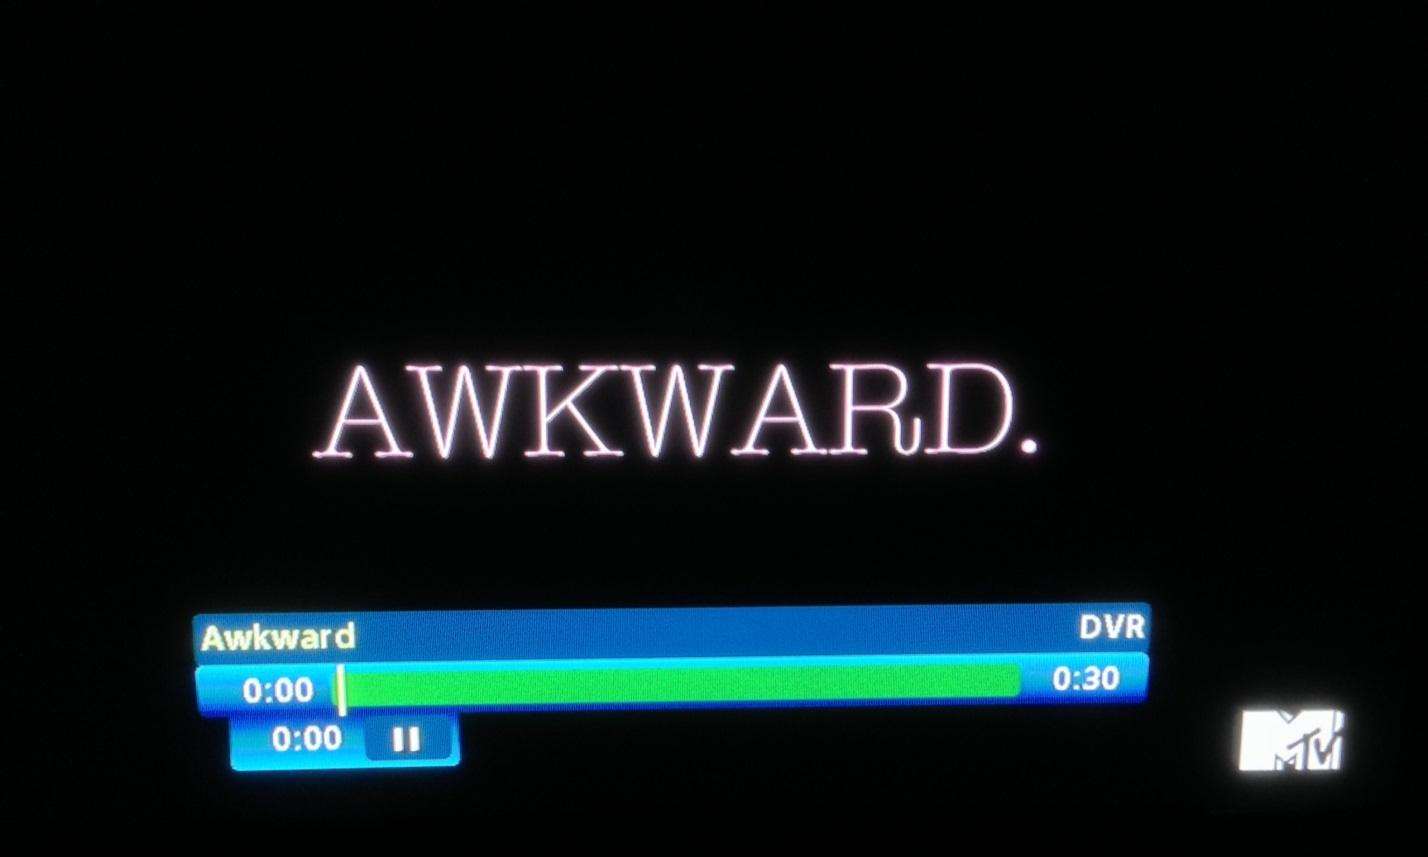 Seasons 1 and 2 are together on DVD with some clips of Season 3.  “Awkward” Season 4 premieres tonight on MTV at 10:30/9:30c. 